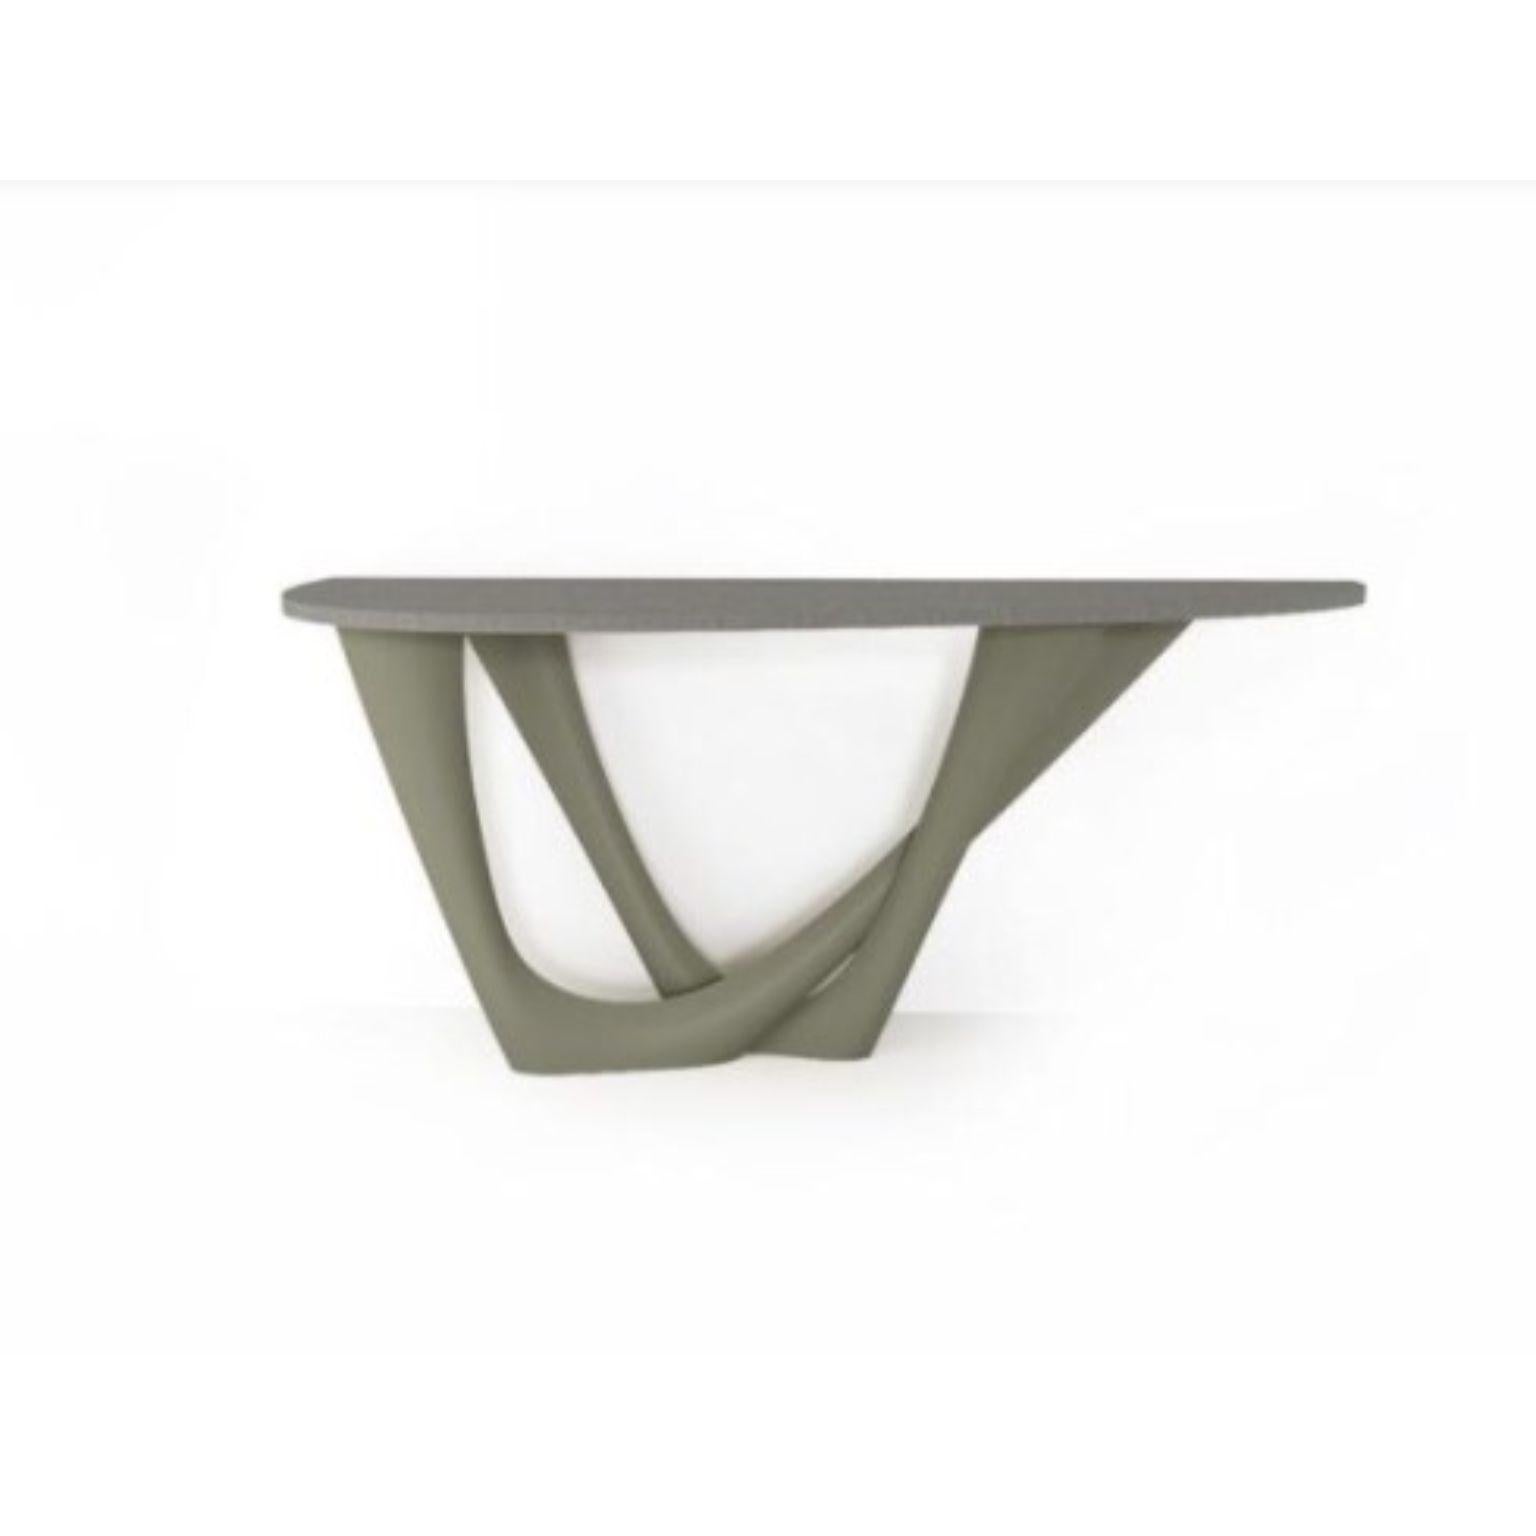 Concrete grey g-console duo concrete top and steel base by Zieta
Dimensions: D 56 x W 168 x H 75 cm 
Material: Carbon steel, concrete.
Also available in different colors and dimensions.

G-Console is another bionic object in our collection. Created